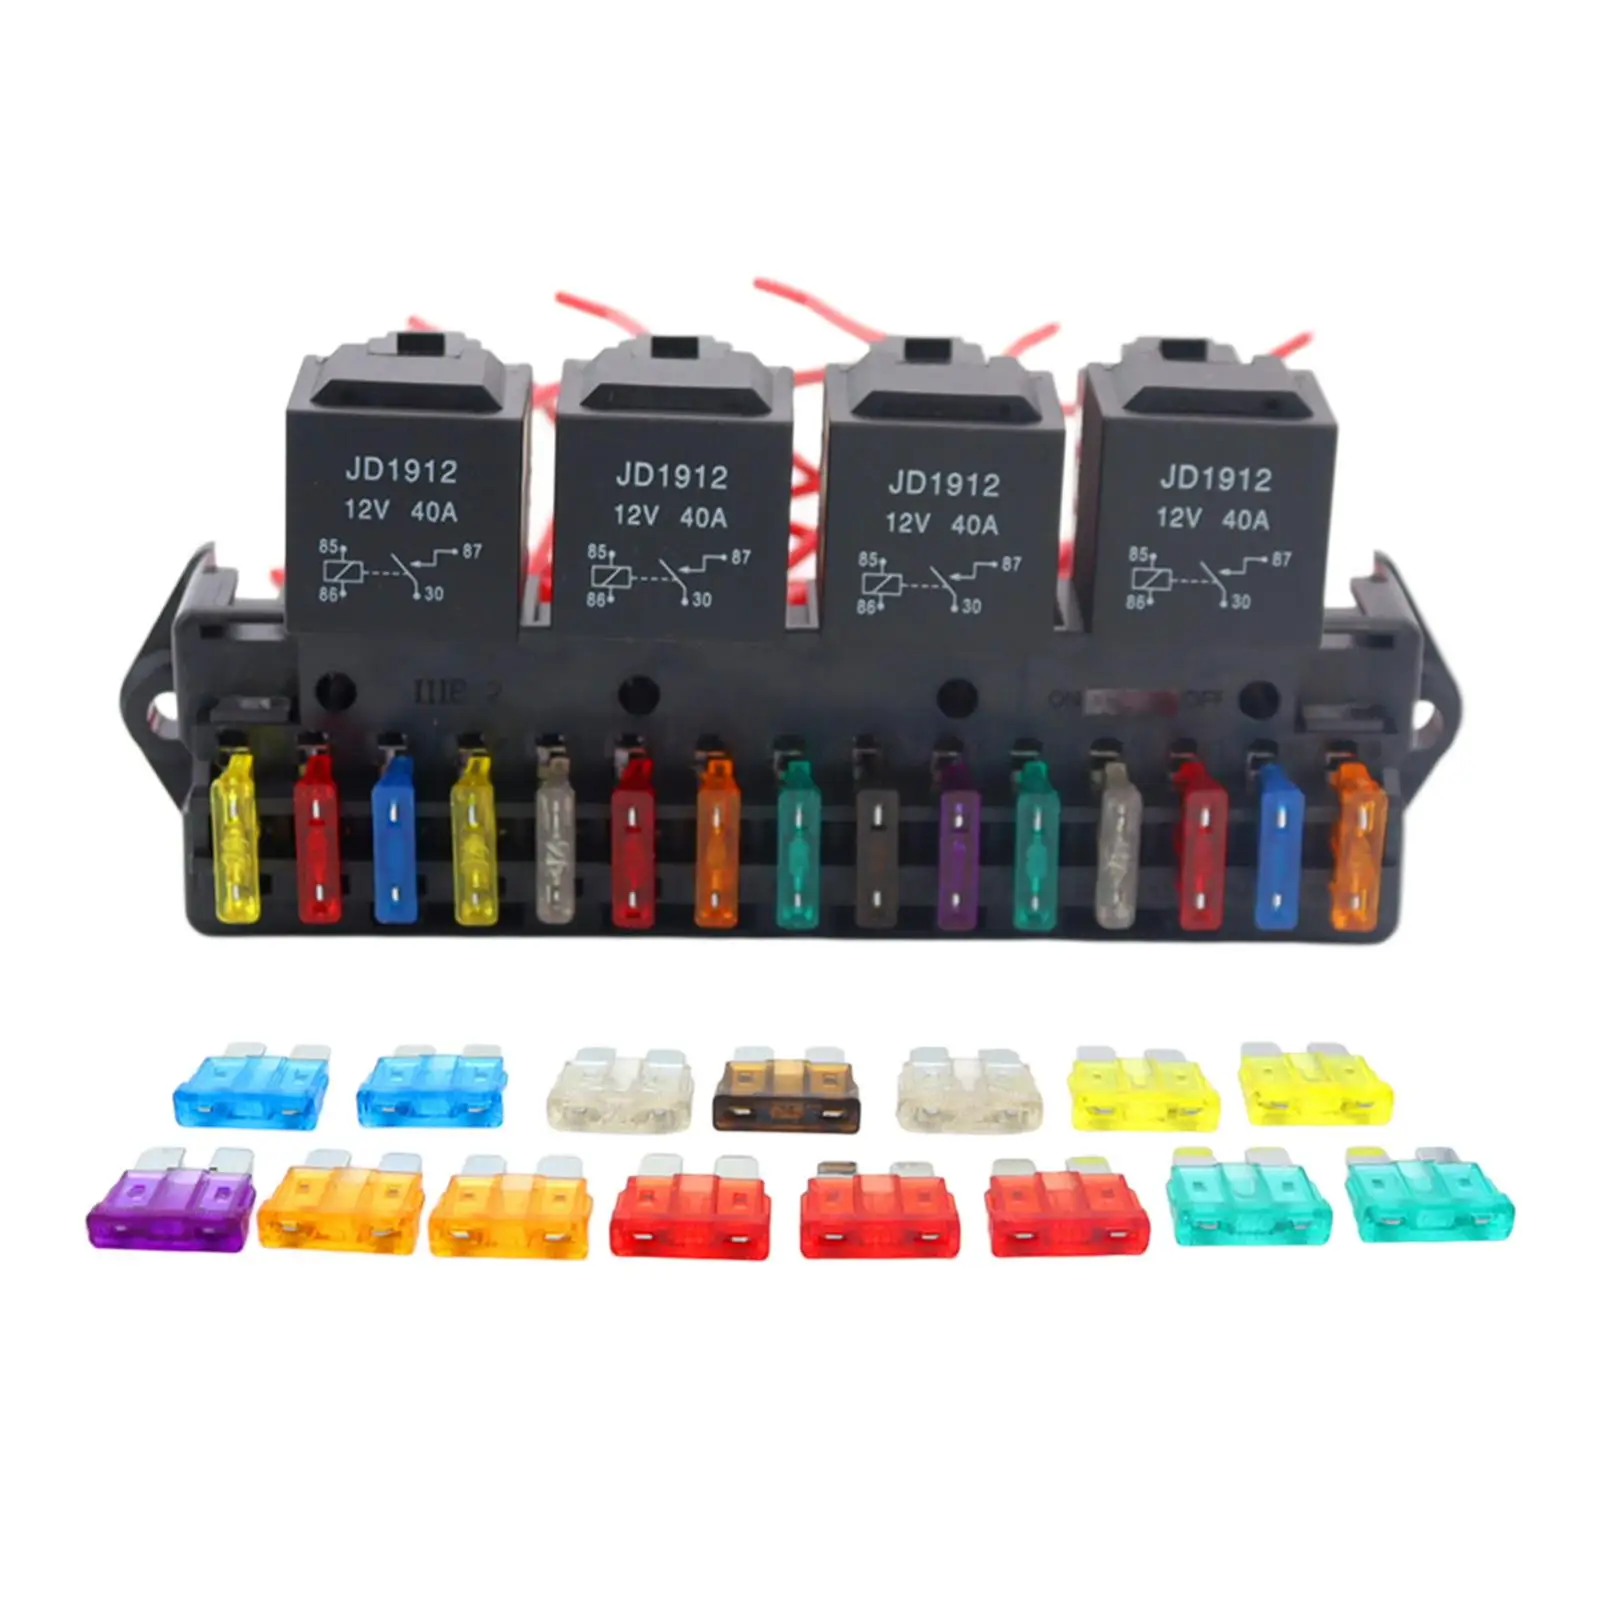 Marine Boat 15 Way Car Fuse Box Block Holder W/ Relay Fit for Automotive